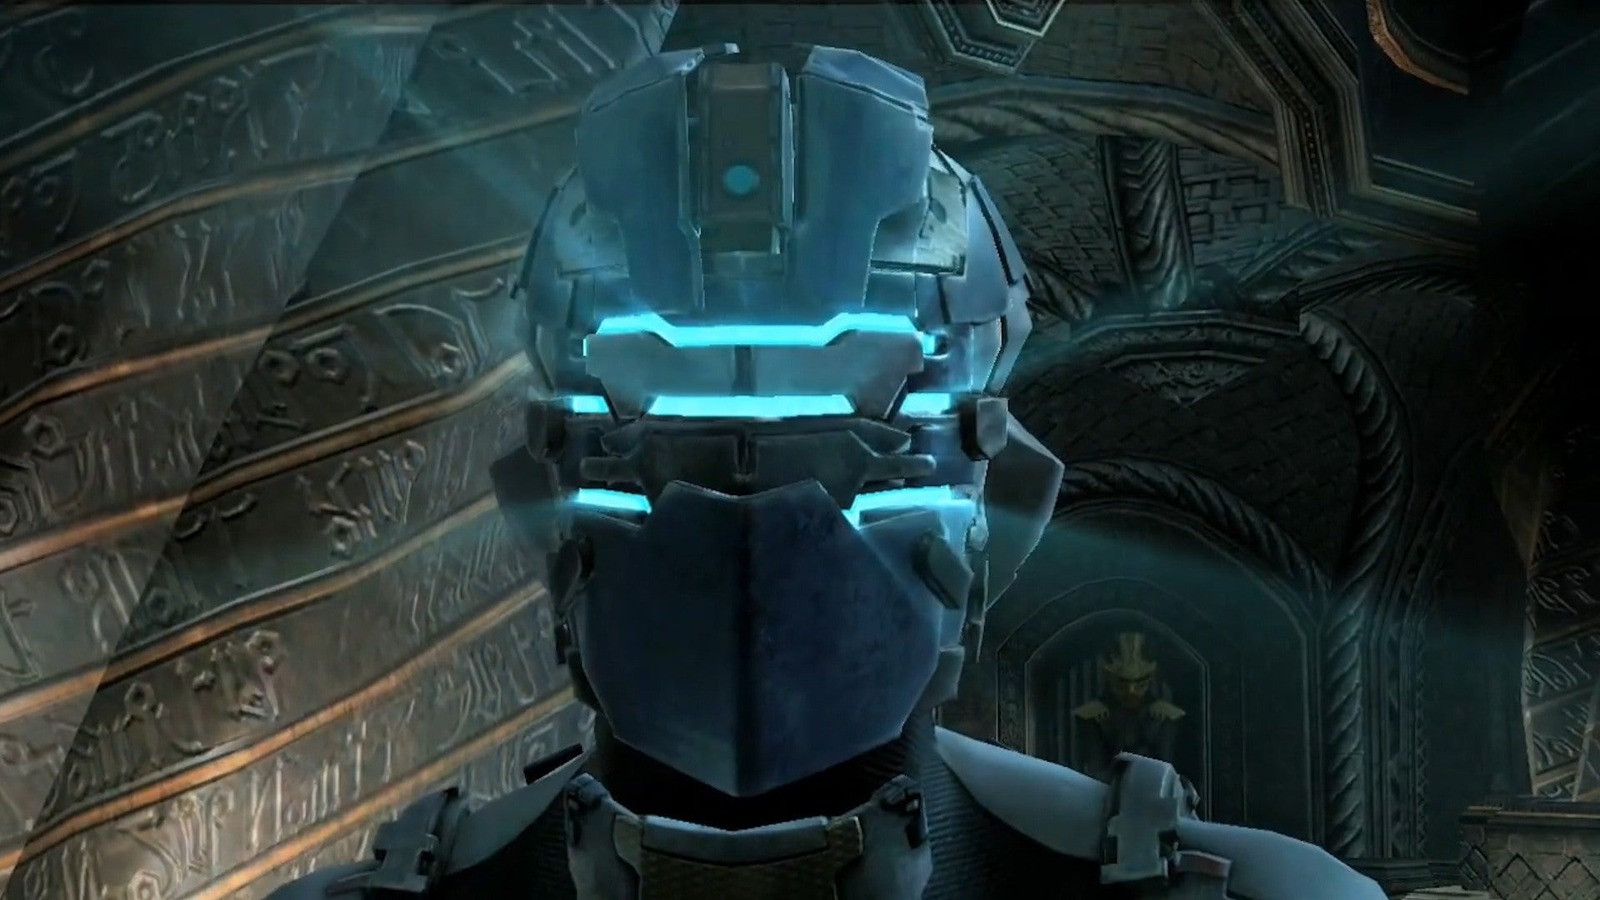 Dead Space' Remake: How the New Game Has Been Updated for Next-Gen